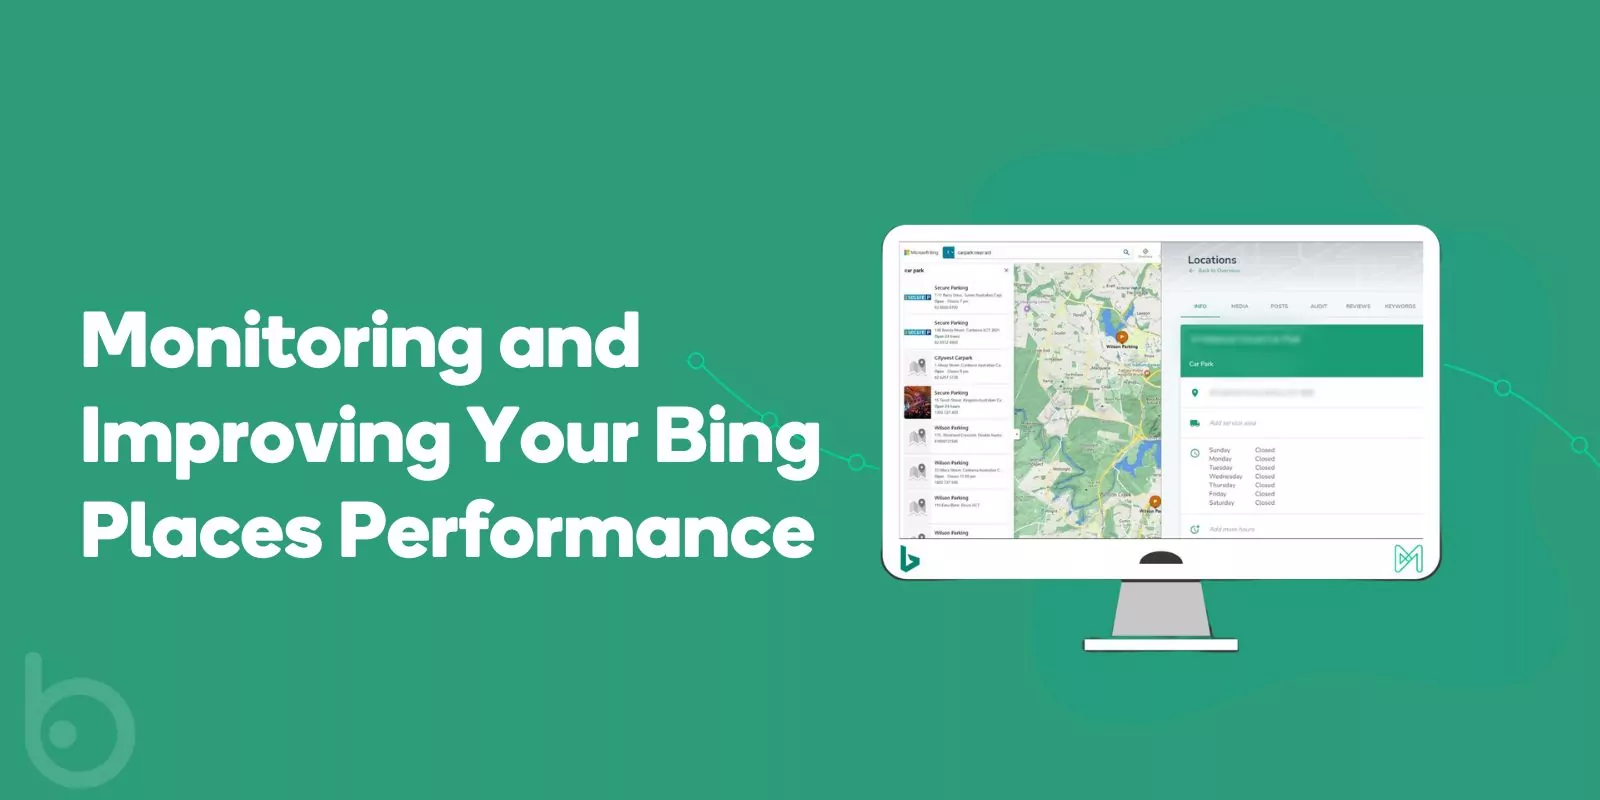 Monitoring and Improving Your Bing Places Performance